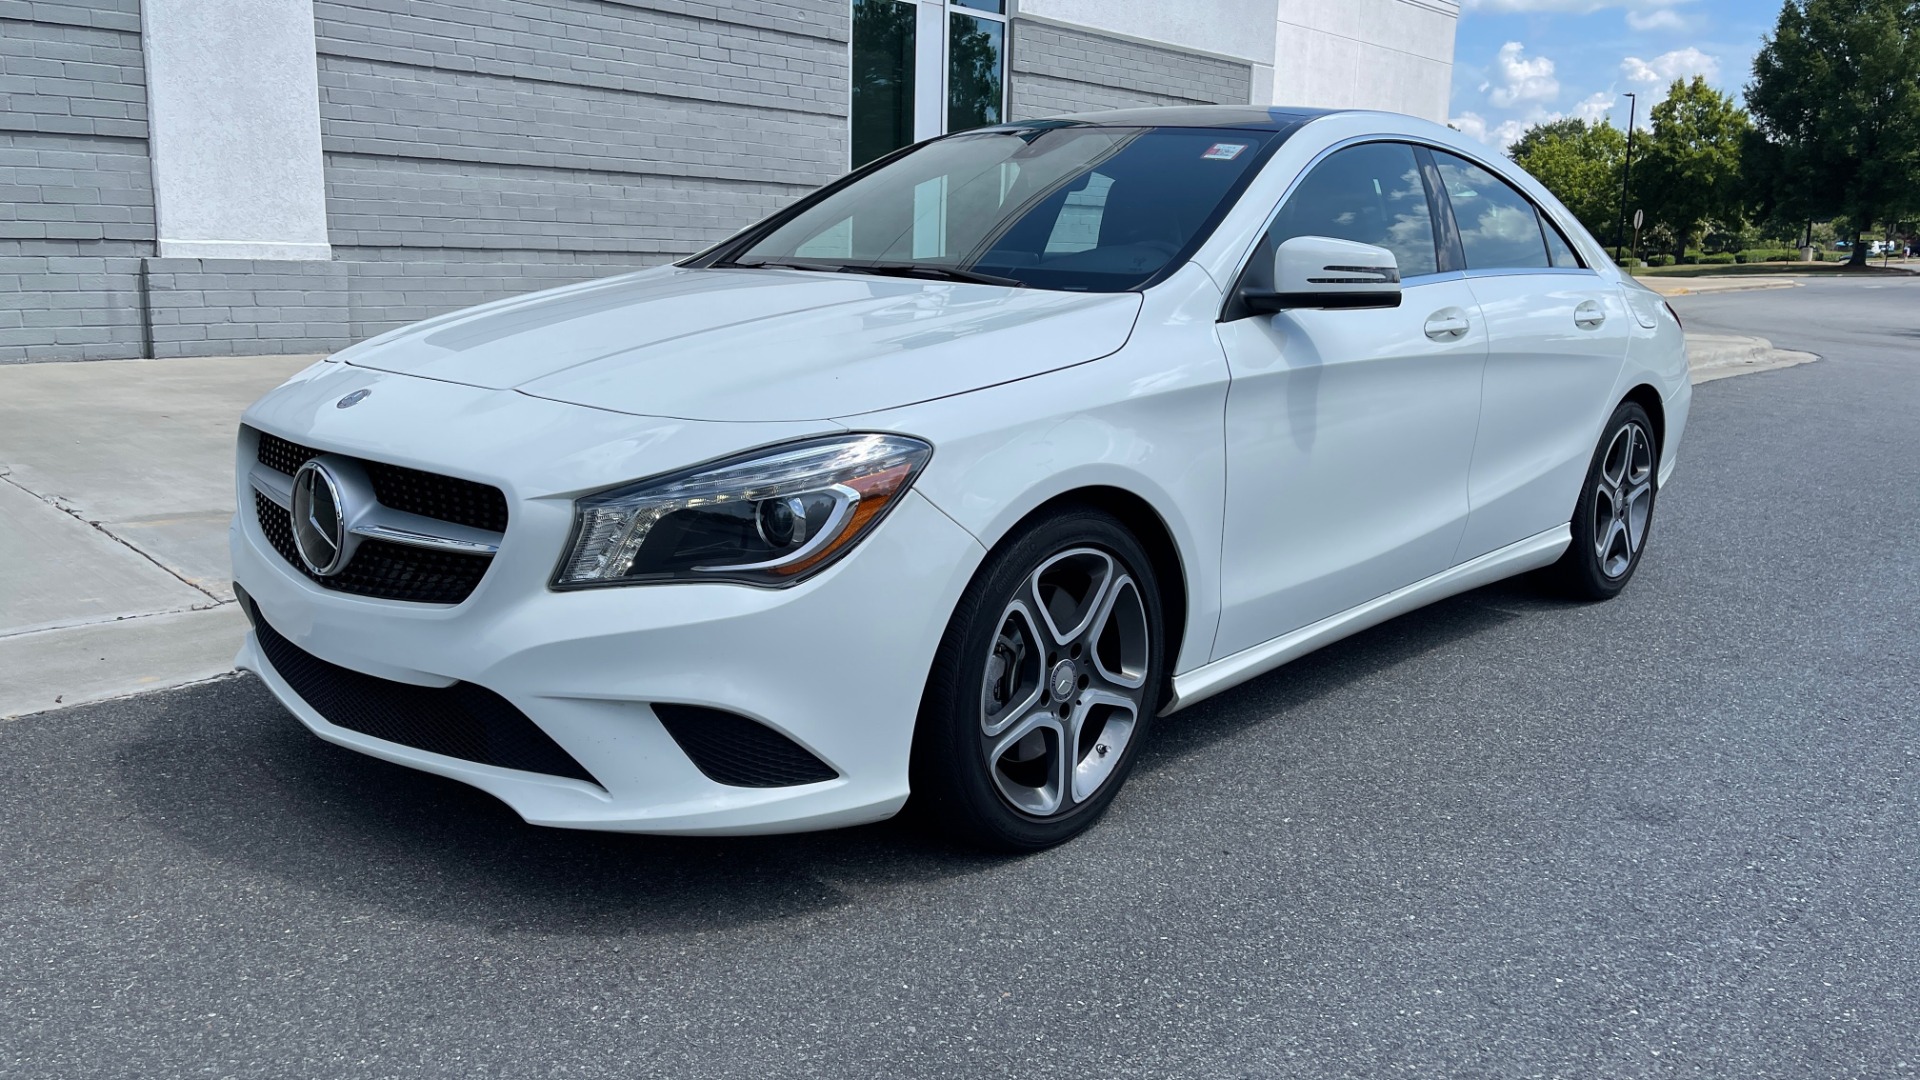 Used 2014 Mercedes-Benz CLA-Class 250 PREMIUM / NAV / MULTIMEDIA PKG / PANO-ROOF / REARVIEW for sale Sold at Formula Imports in Charlotte NC 28227 3